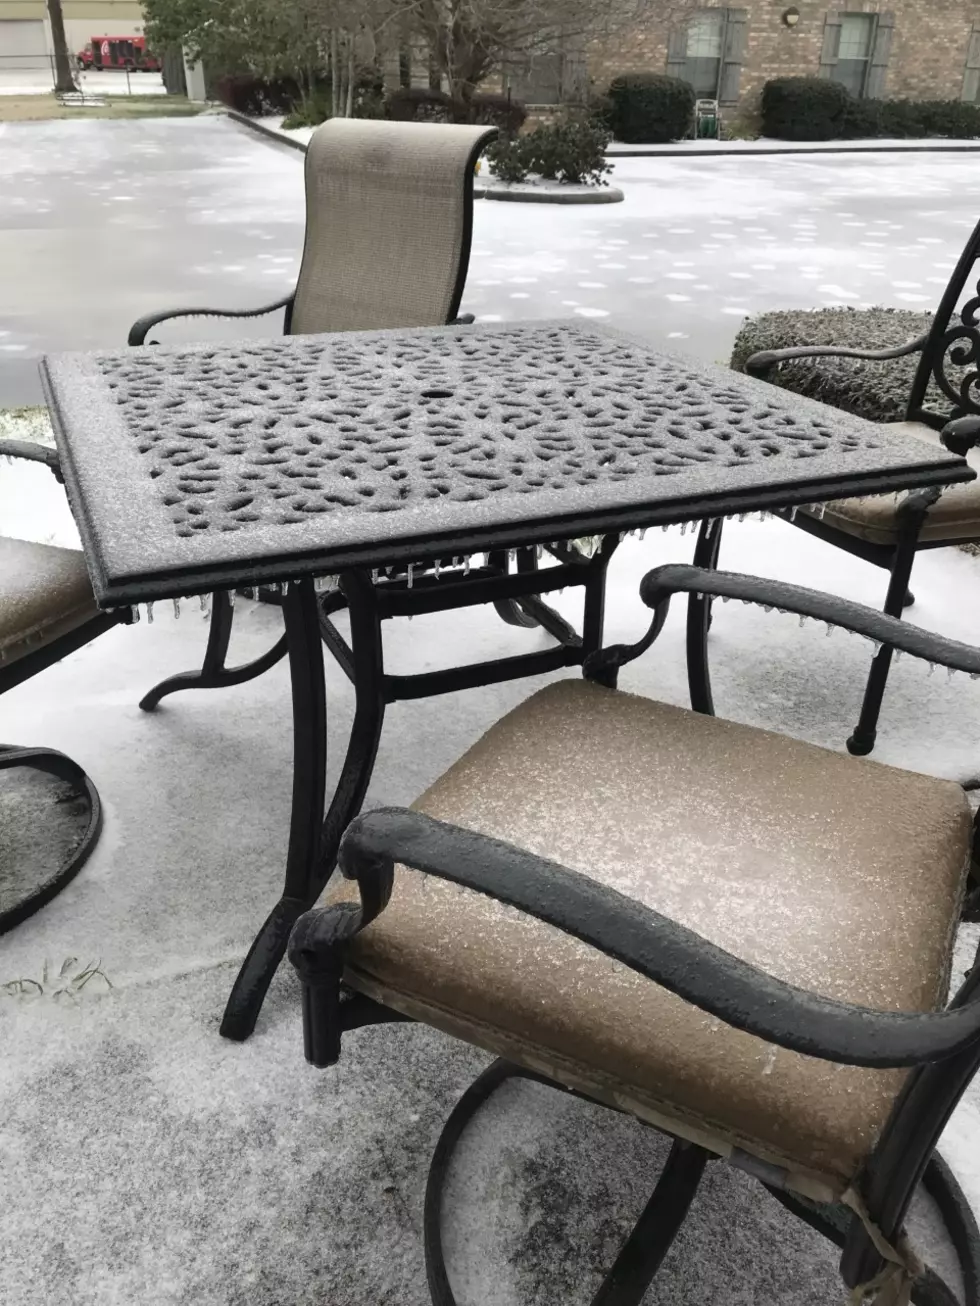 Acadiana Sneaux Day; A Review In Pictures